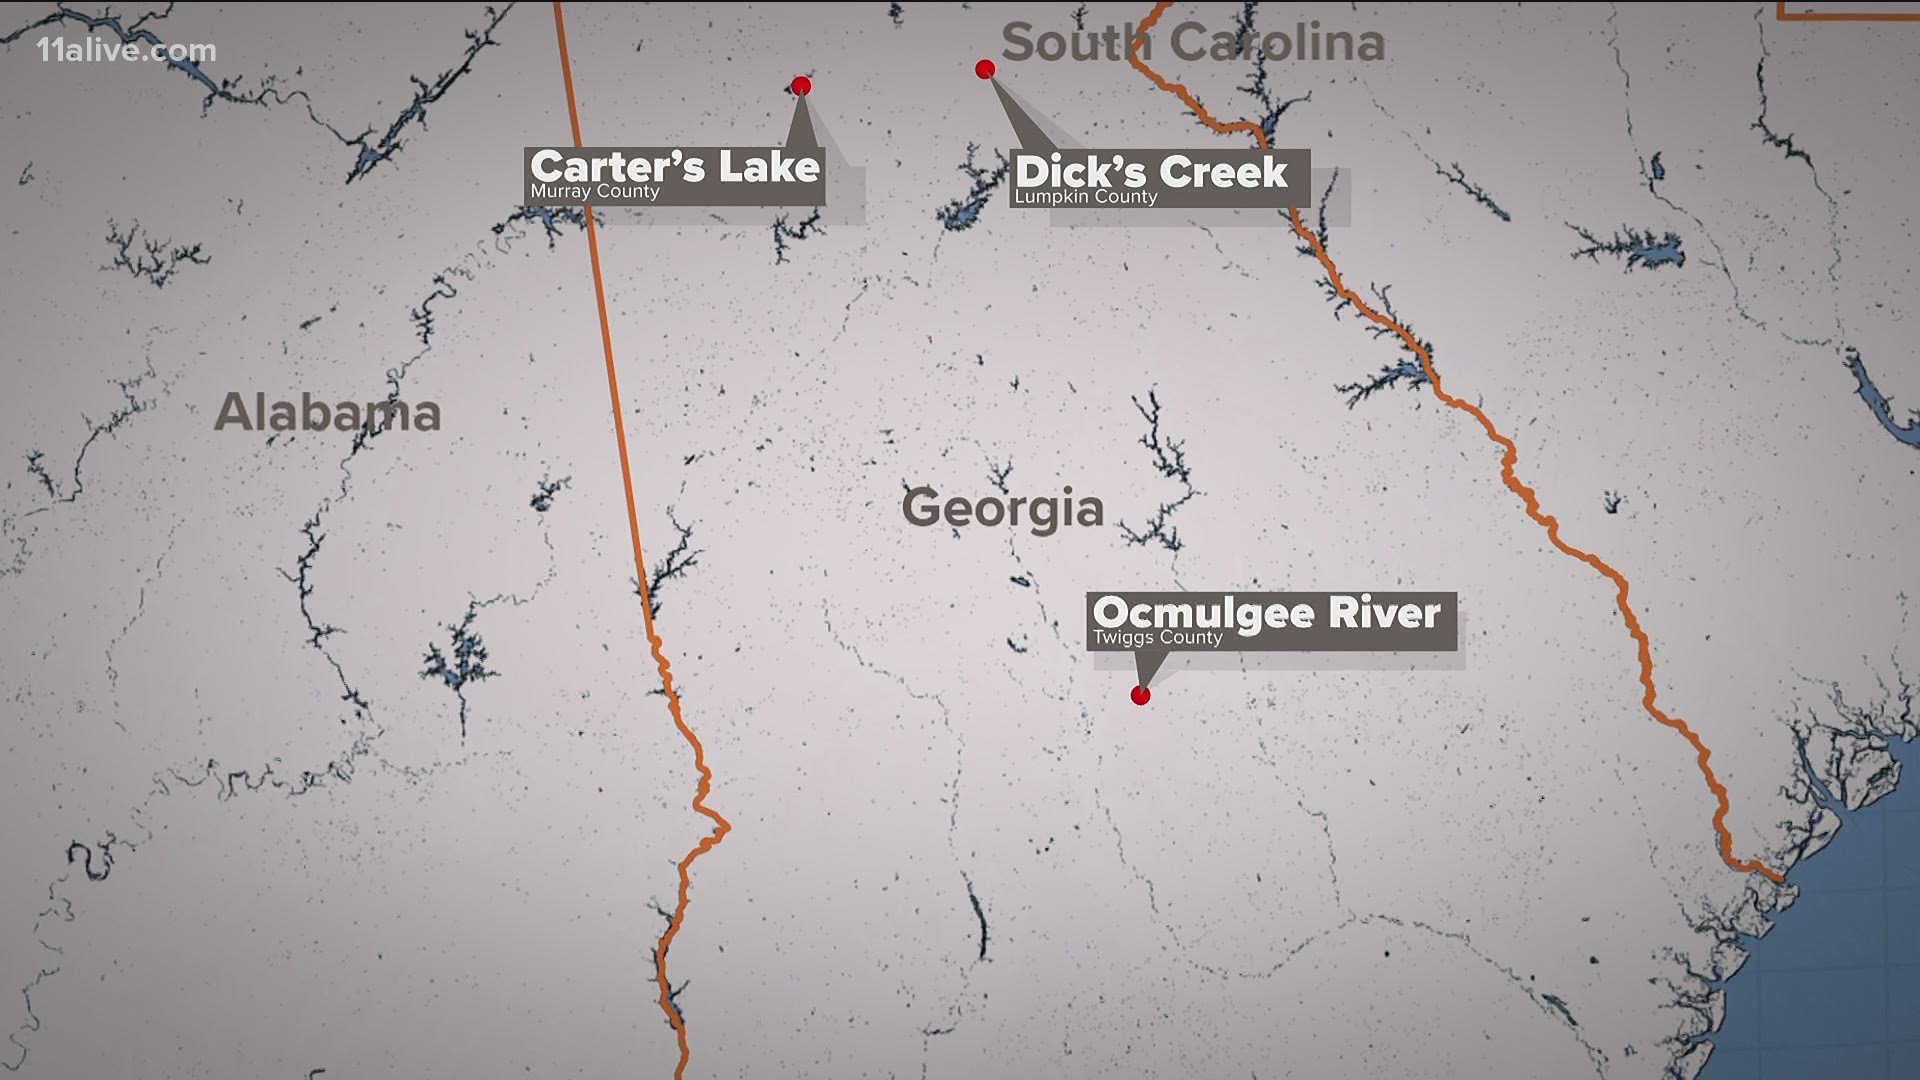 Georgia's Department of Natural Resources said three people drowned and one person was killed in a boating-related incident over the Memorial Day holiday.